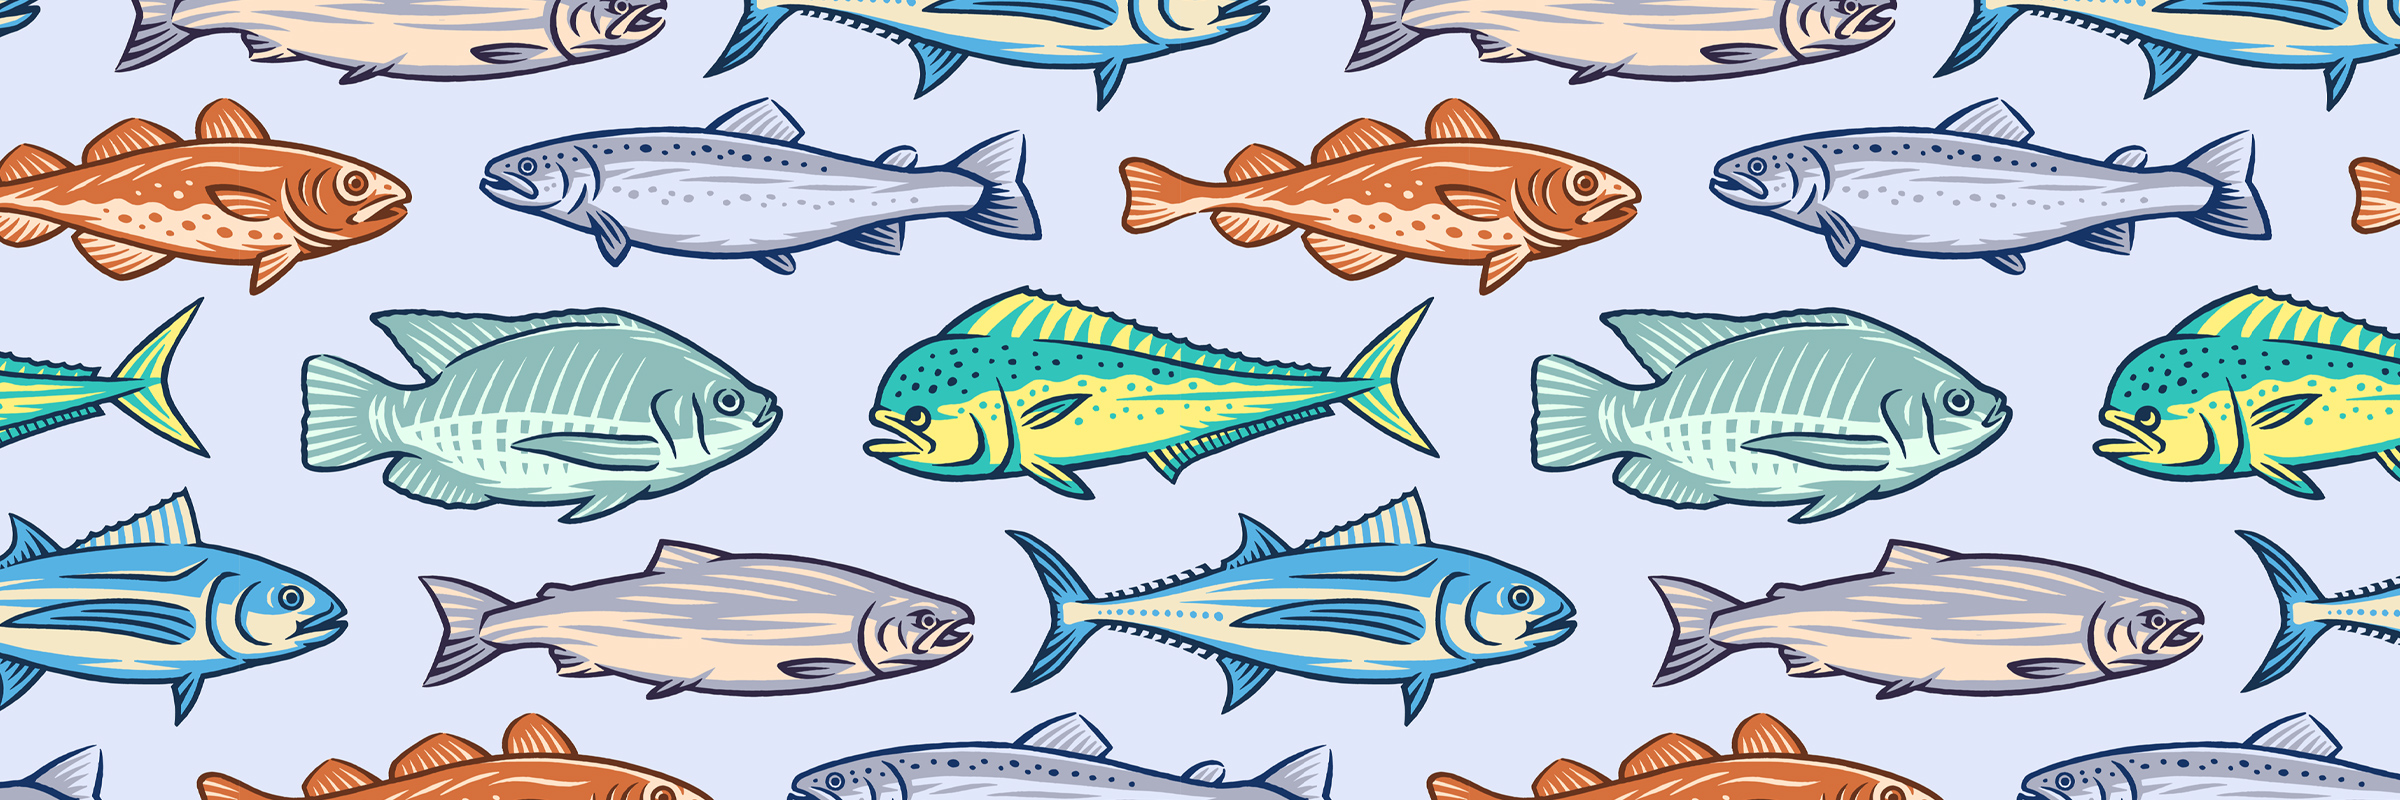 variety of illustrated fish